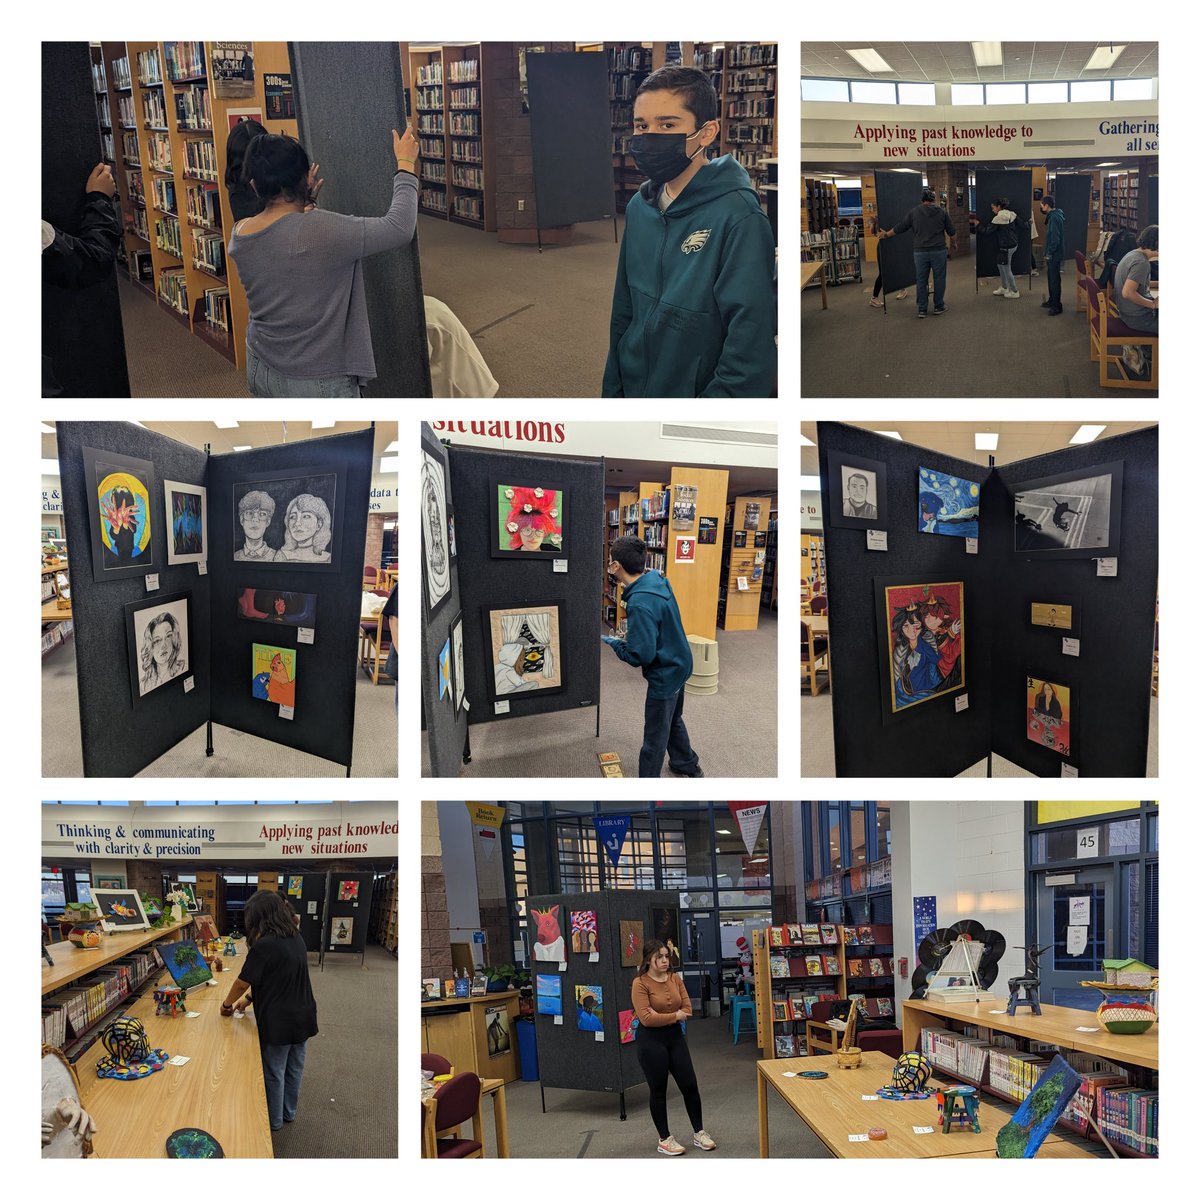 Art club working hard setting up the Big Art Day Student Showcase. Come out and support our Trailblazing Artists tomorrow. #Bigartday23 #TeamSISD #SISDFineArts #BlazerNation